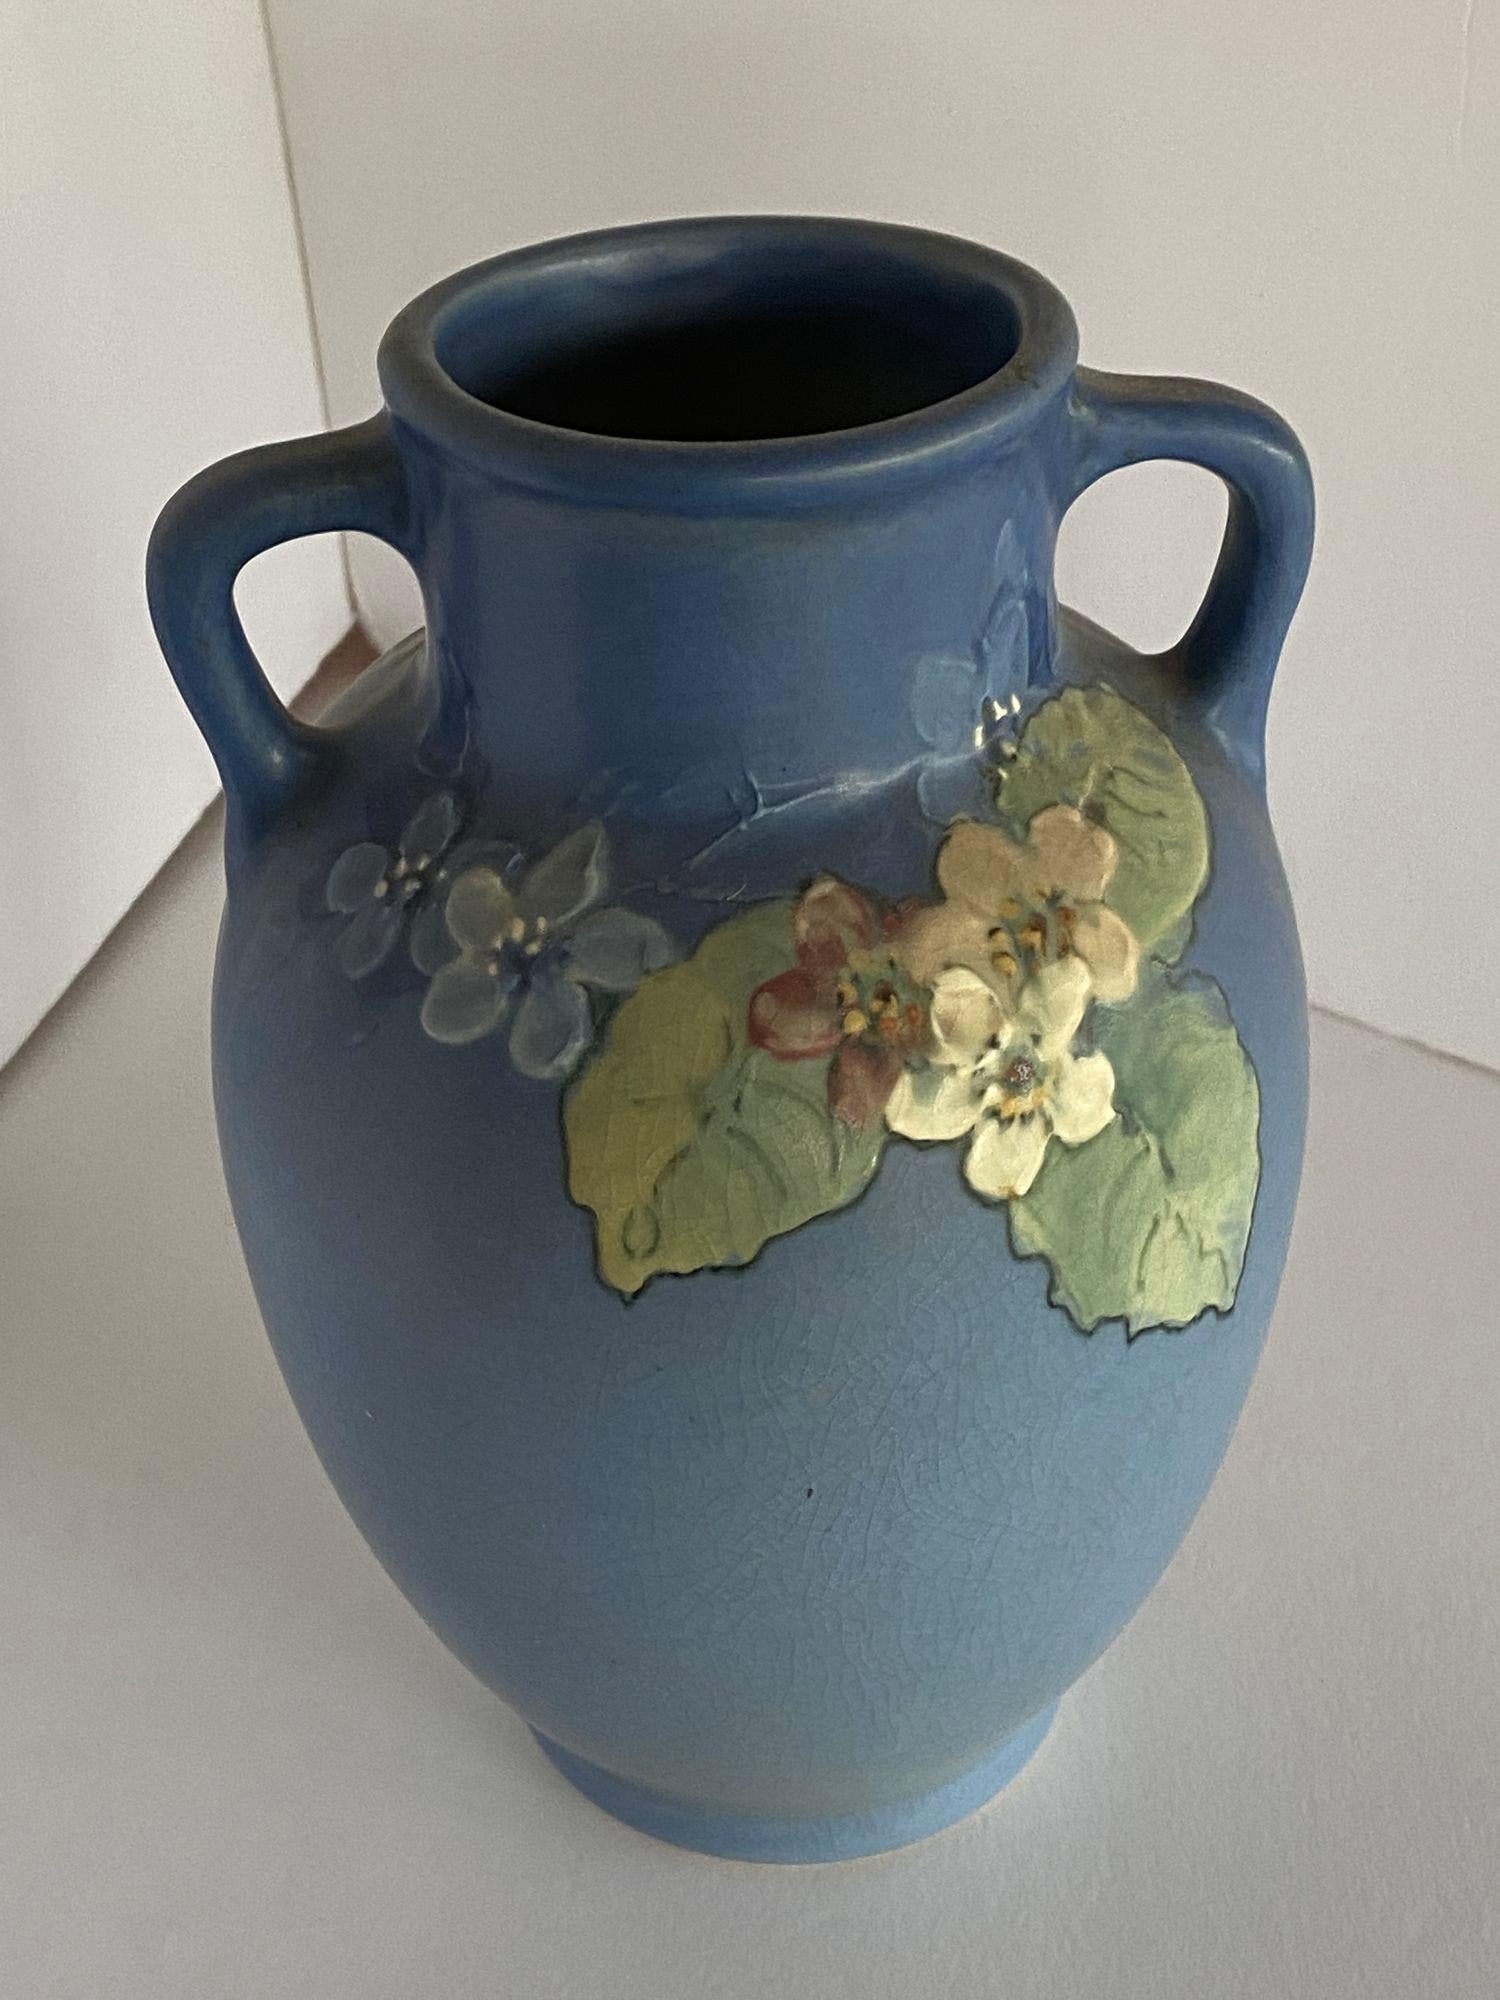 Antique Arts & Crafts art pottery vase by Weller Pottery features pink and white floral design on graduated sea foam green to blue ground, artist and maker signed as photographed, circa 1920.

Measures: 9.75